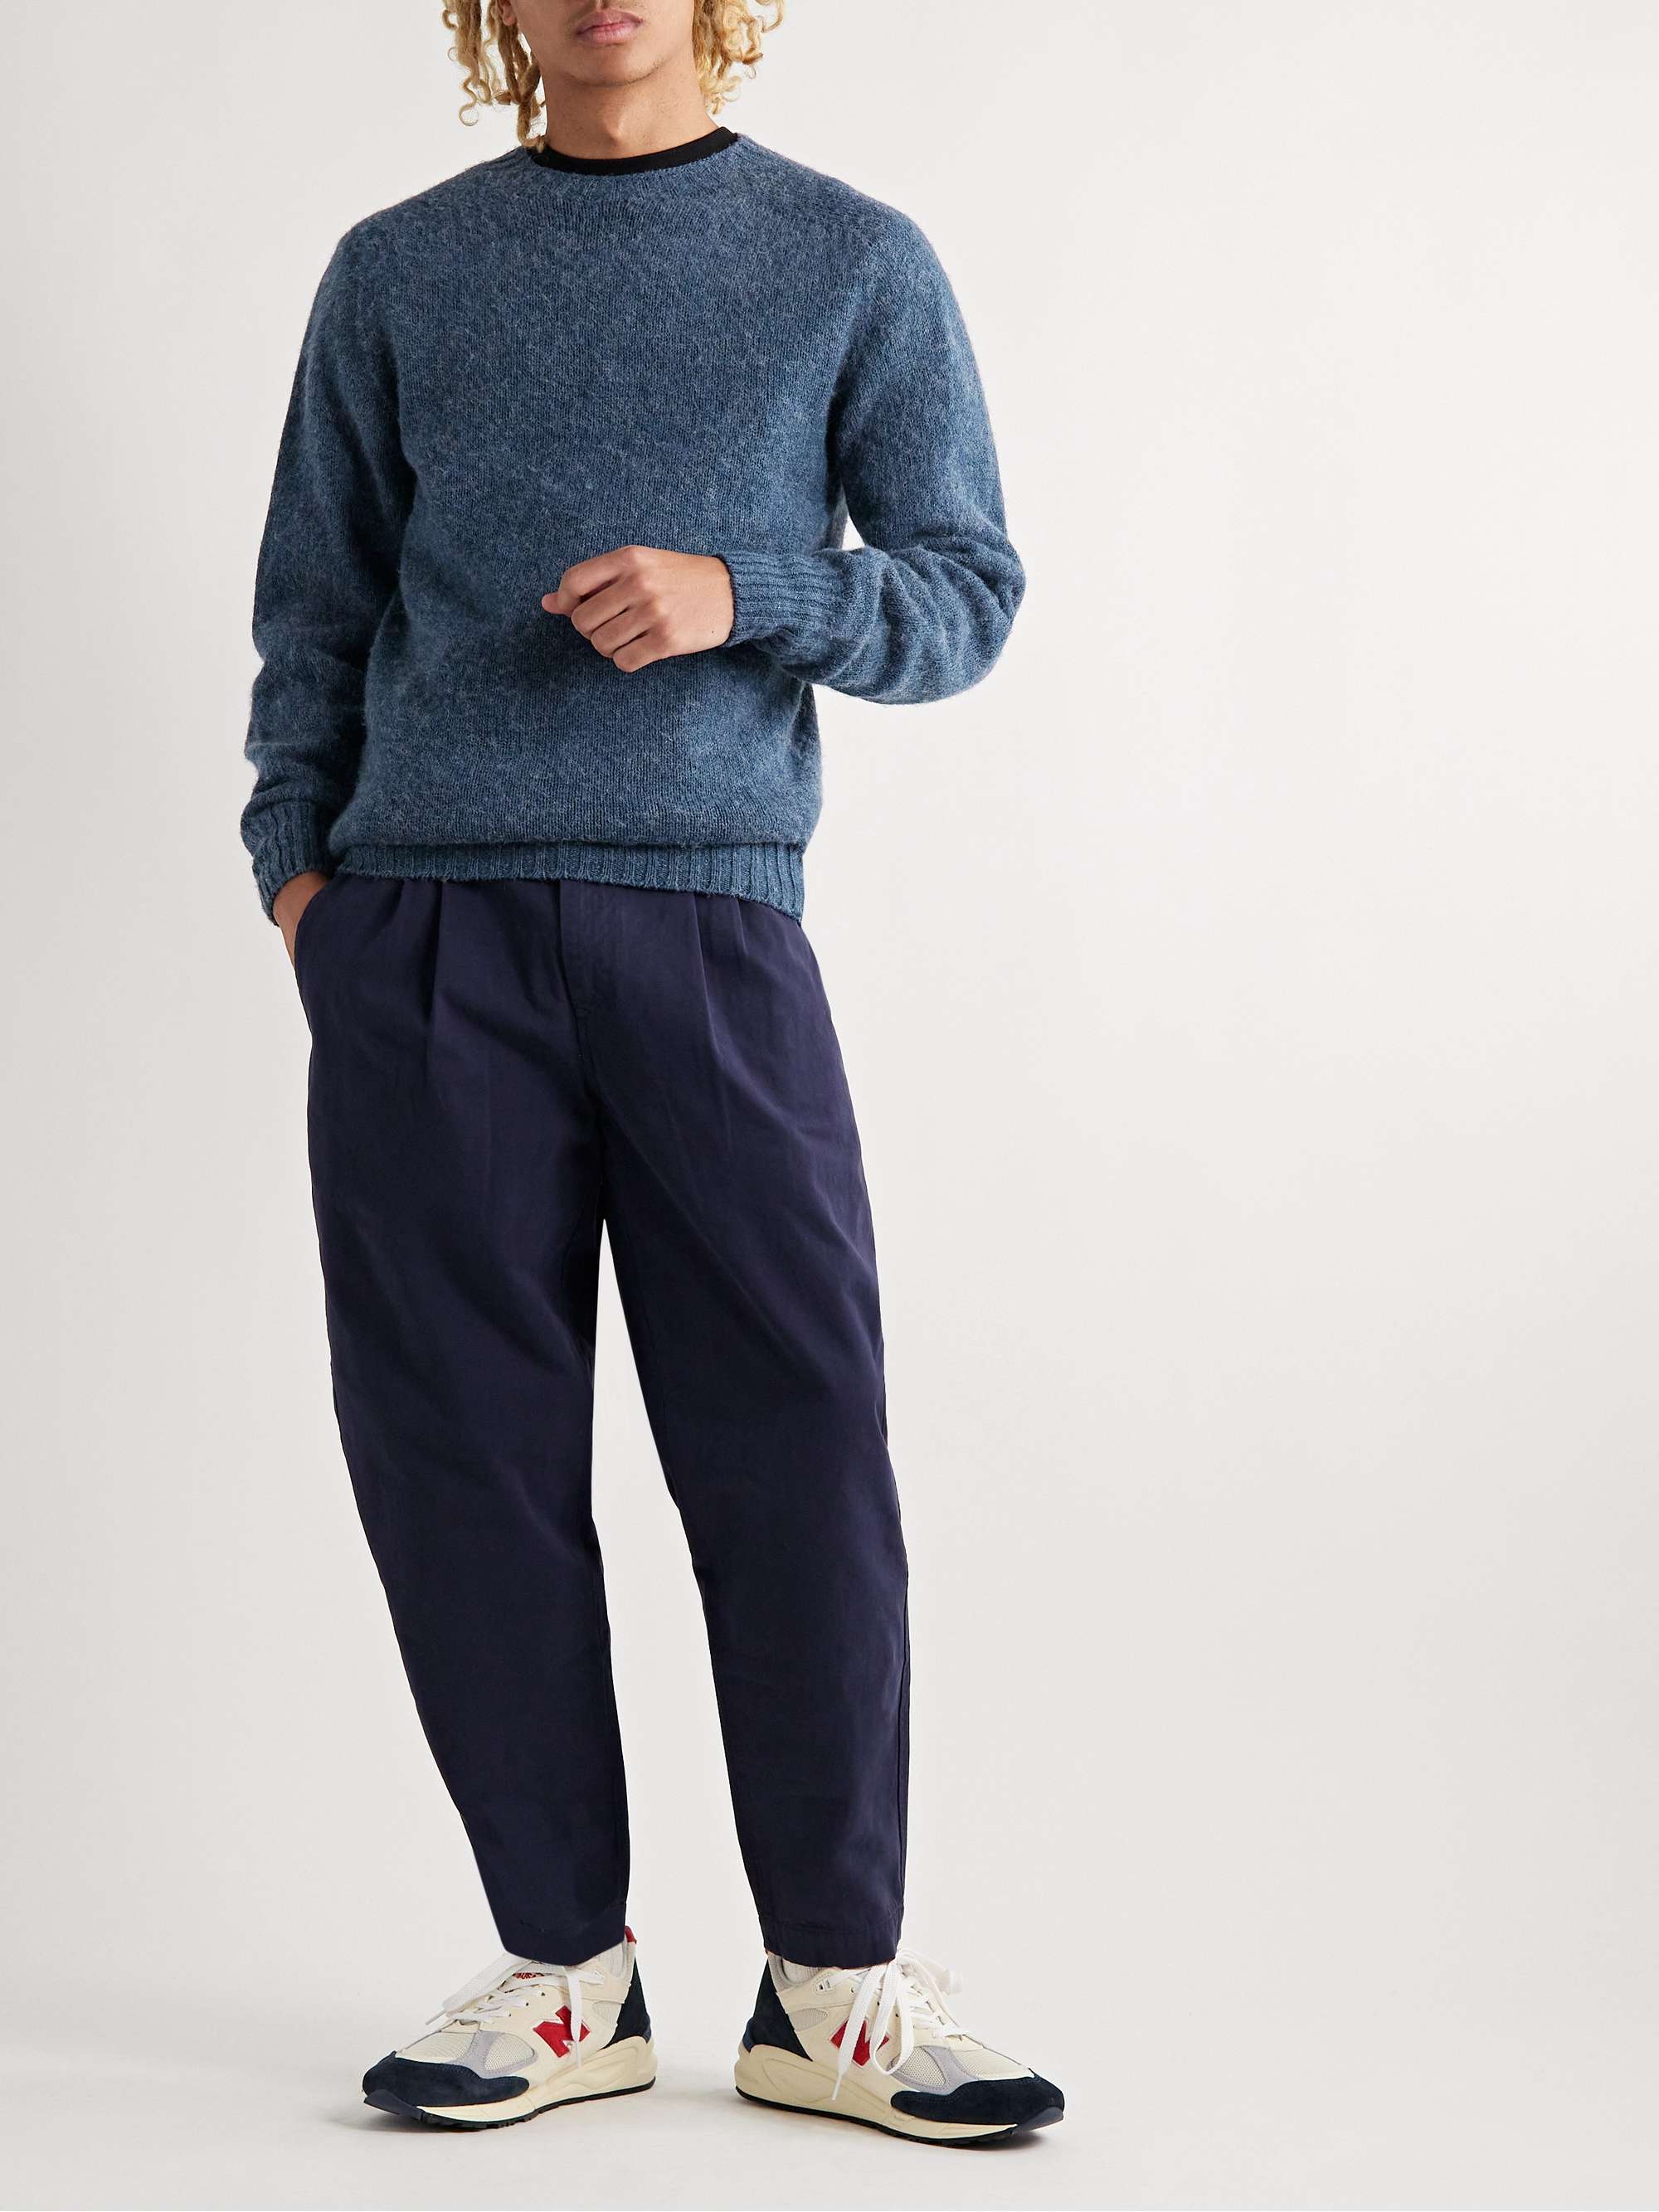 Blue Birth of the Cool Brushed Wool Sweater | HOWLIN' | MR PORTER